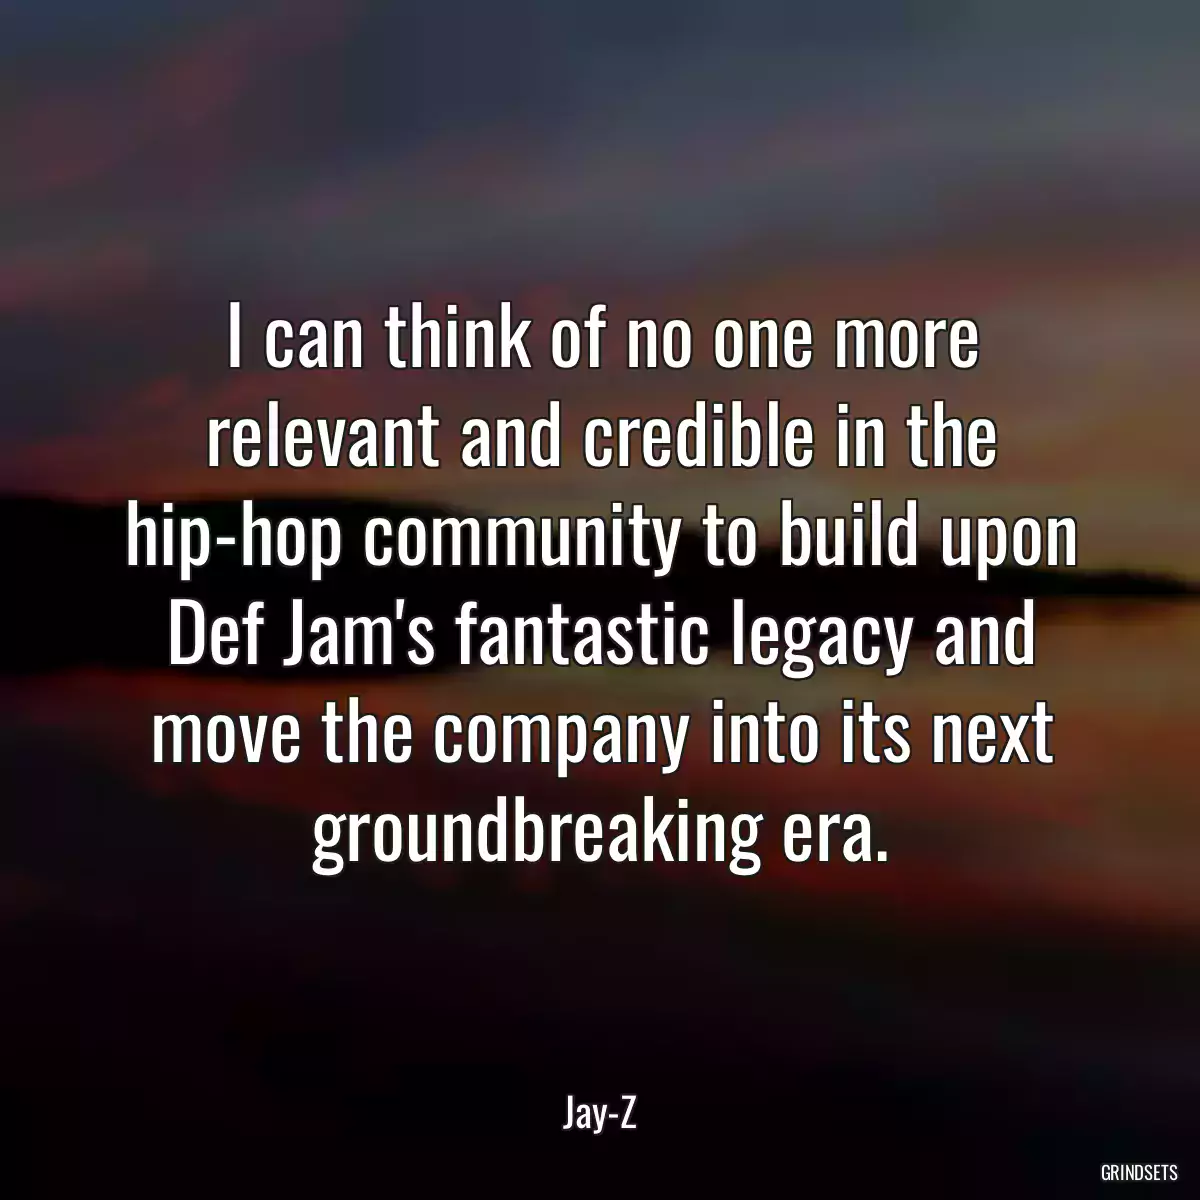 I can think of no one more relevant and credible in the hip-hop community to build upon Def Jam\'s fantastic legacy and move the company into its next groundbreaking era.